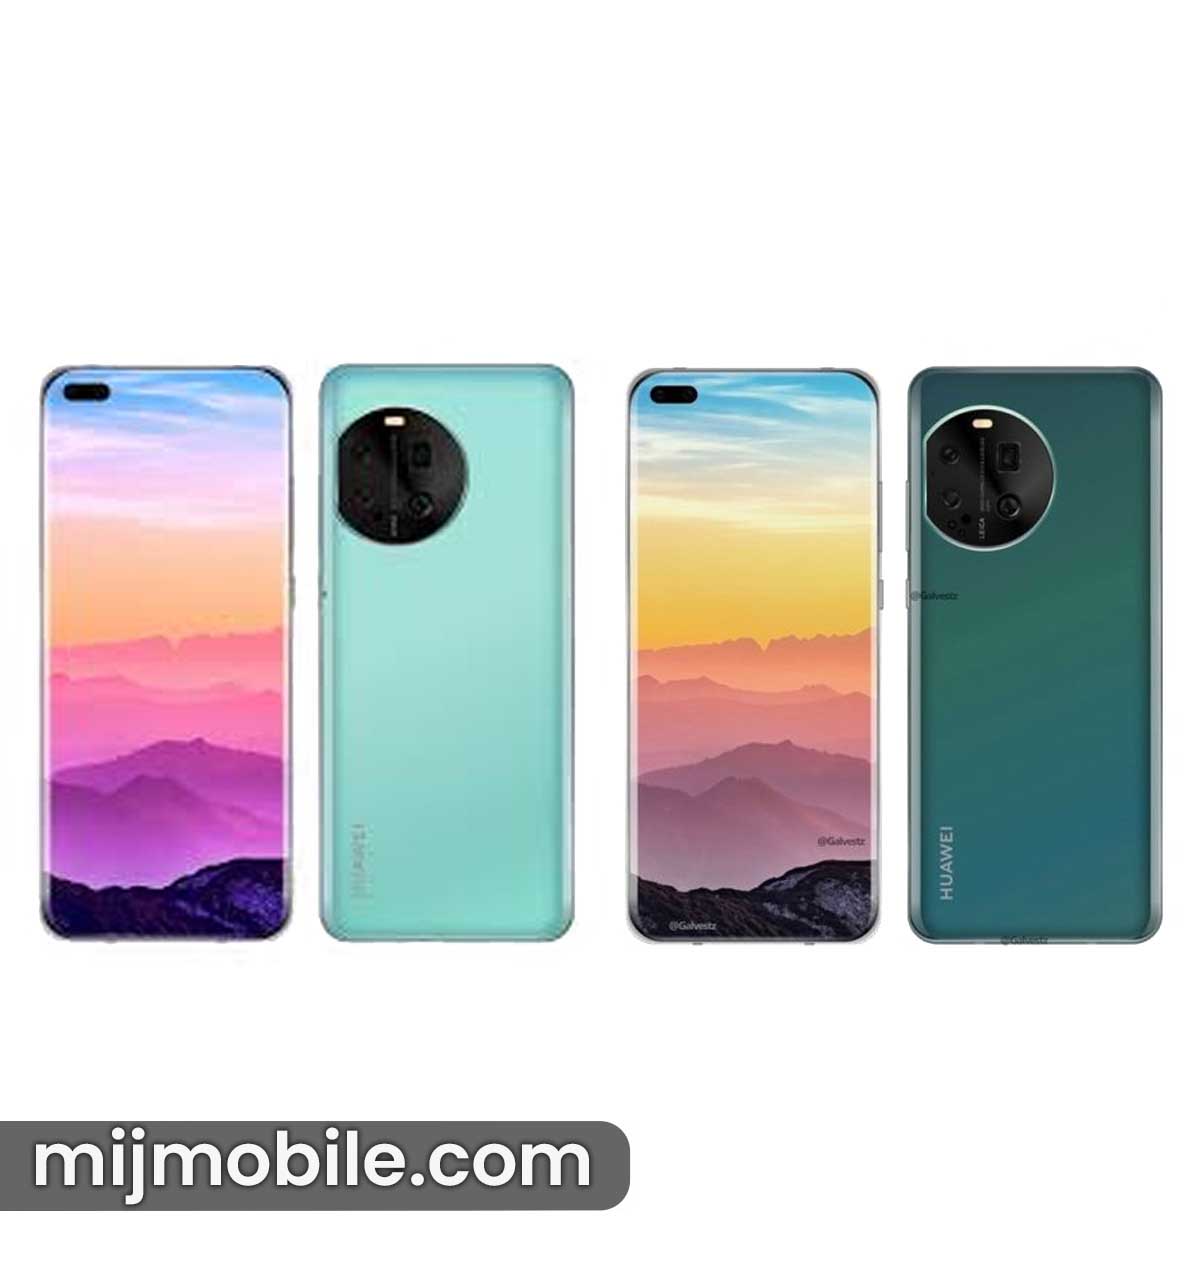 Huawei P50 Pro Price in Pakistan & Specifications Huawei P50 Pro Price in Pakistan is only 159,999.